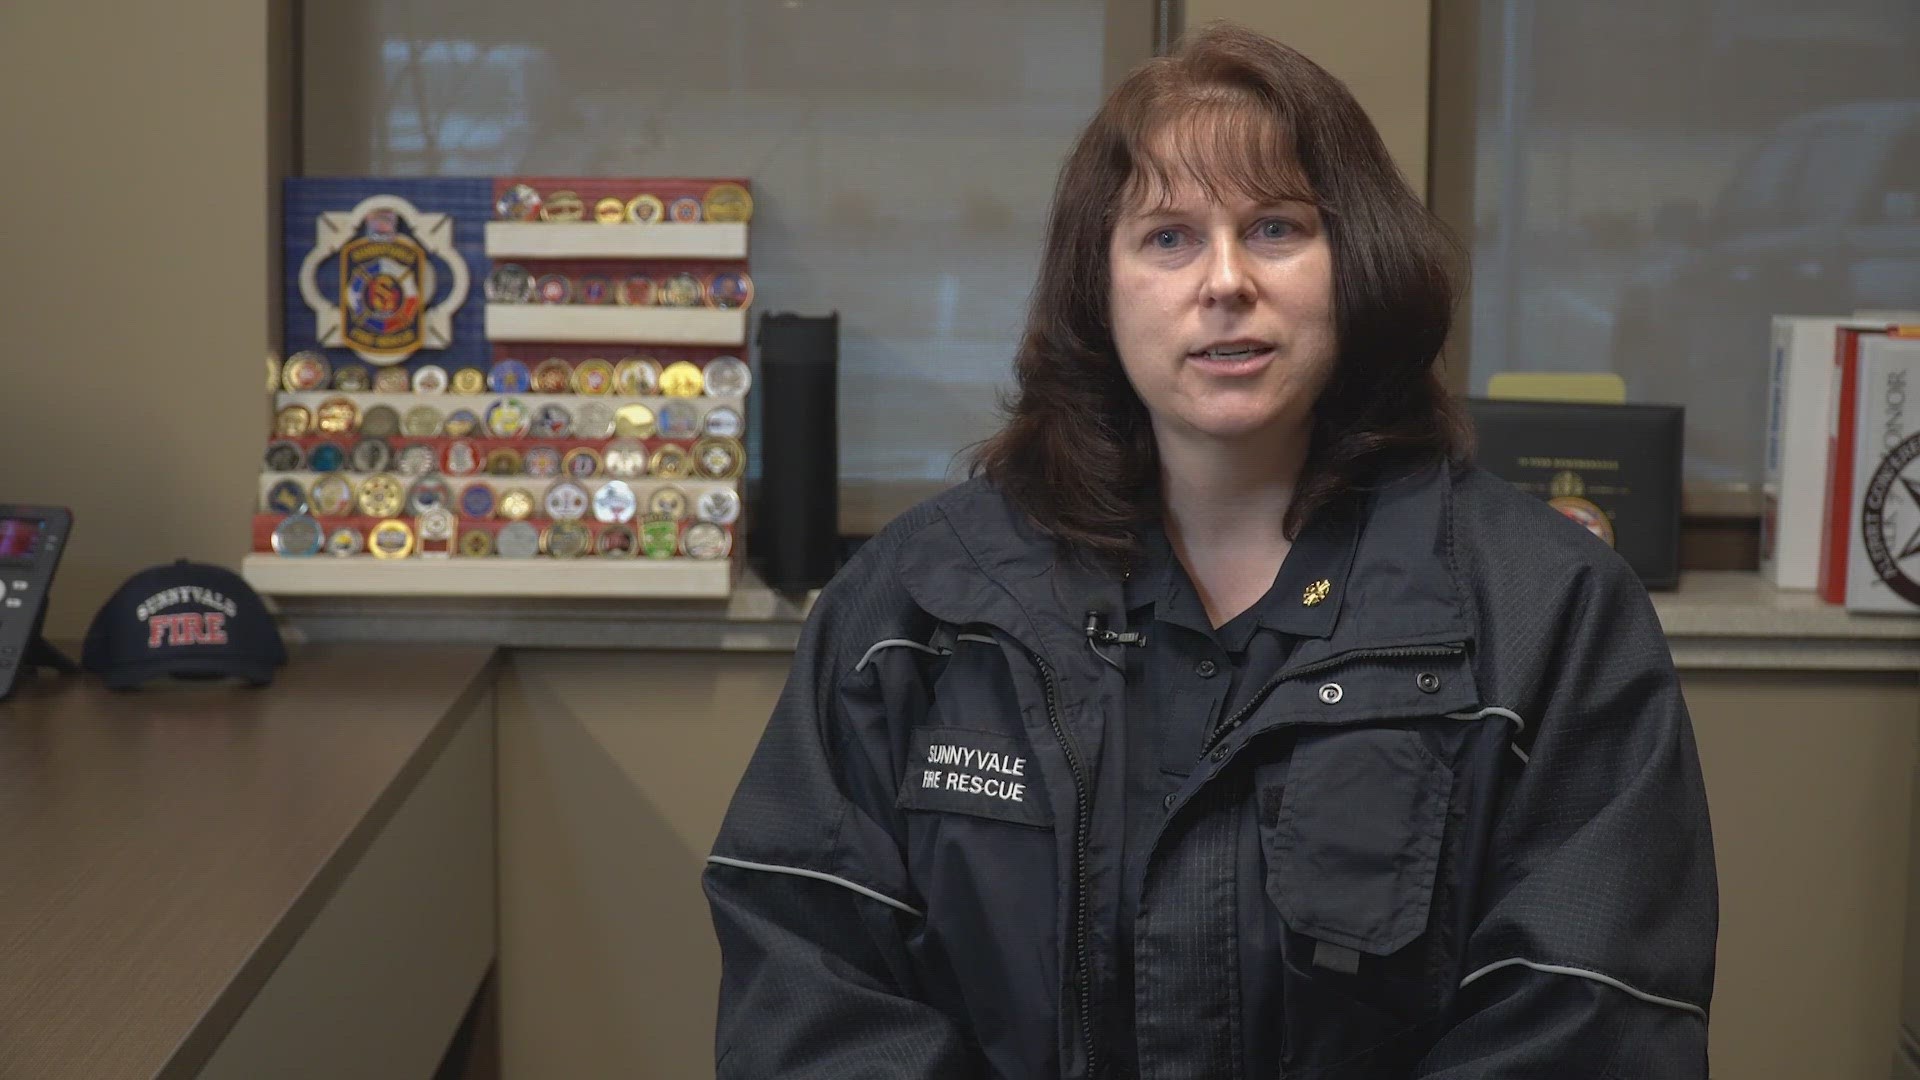 Sunnyvale Fire Chief Tami Kayea is one of only a few female fire chiefs in all of Texas.